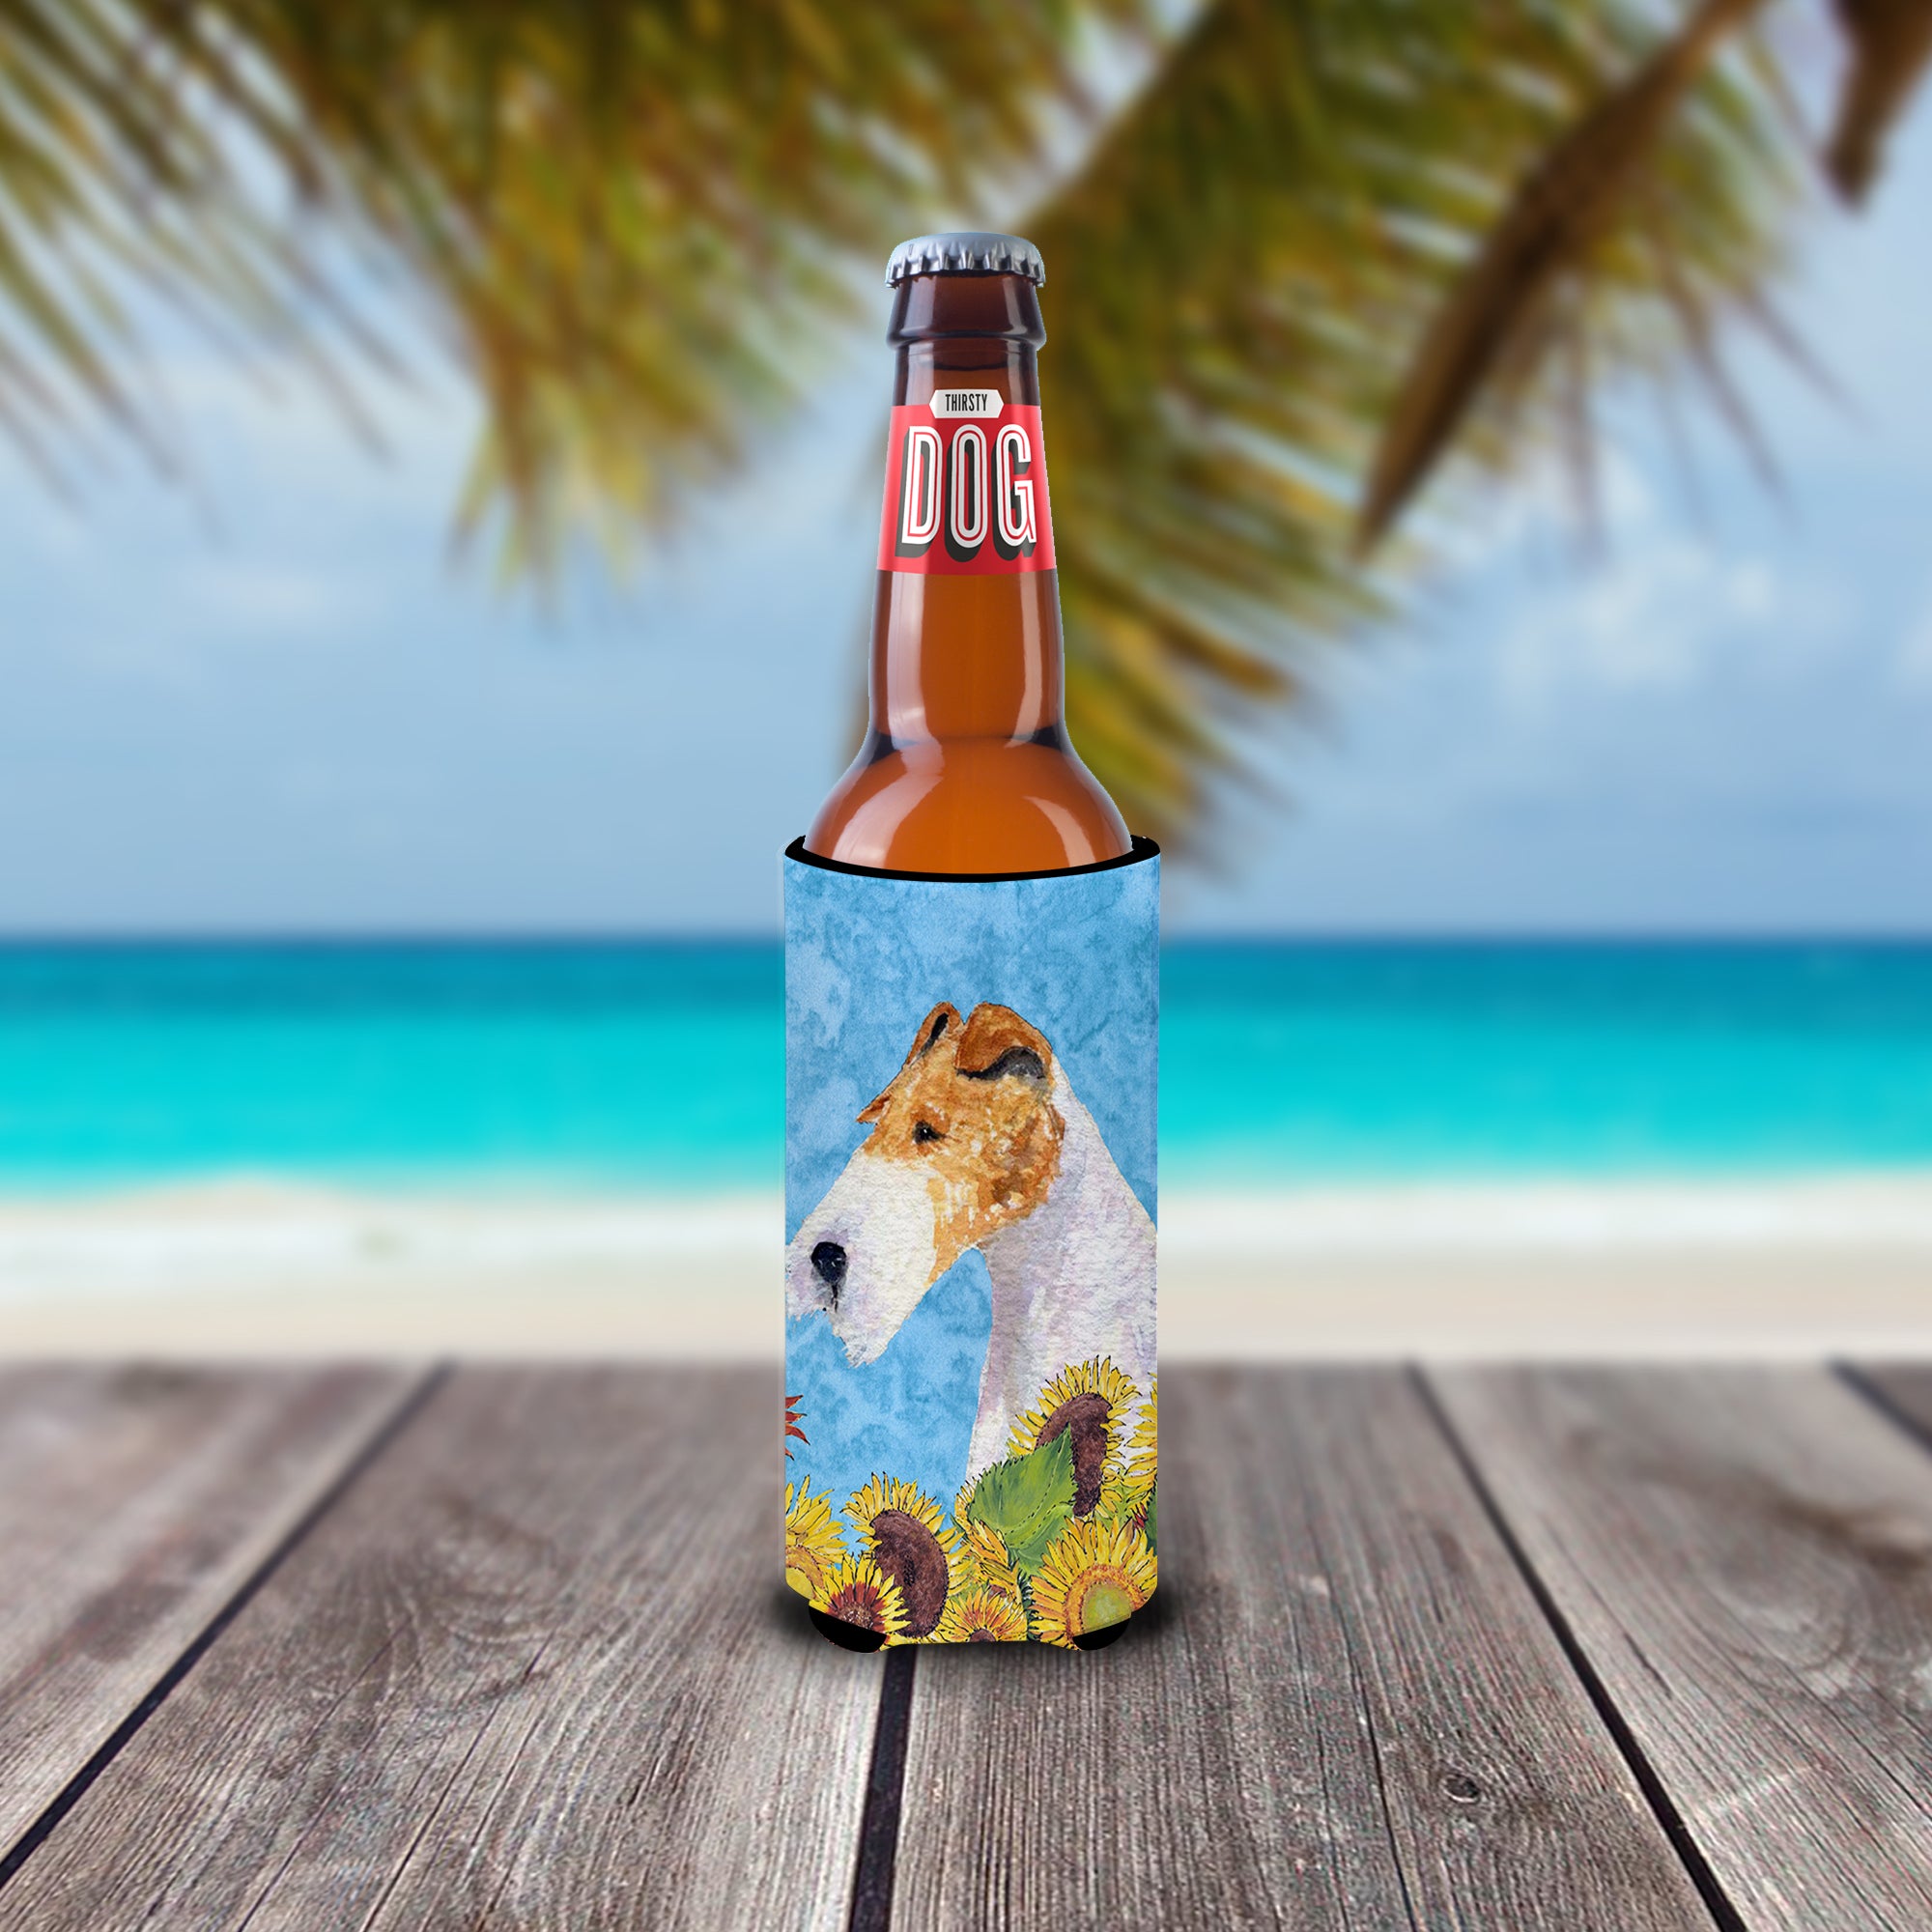 Fox Terrier in Summer Flowers Ultra Beverage Isolateurs pour canettes minces SS4111MUK